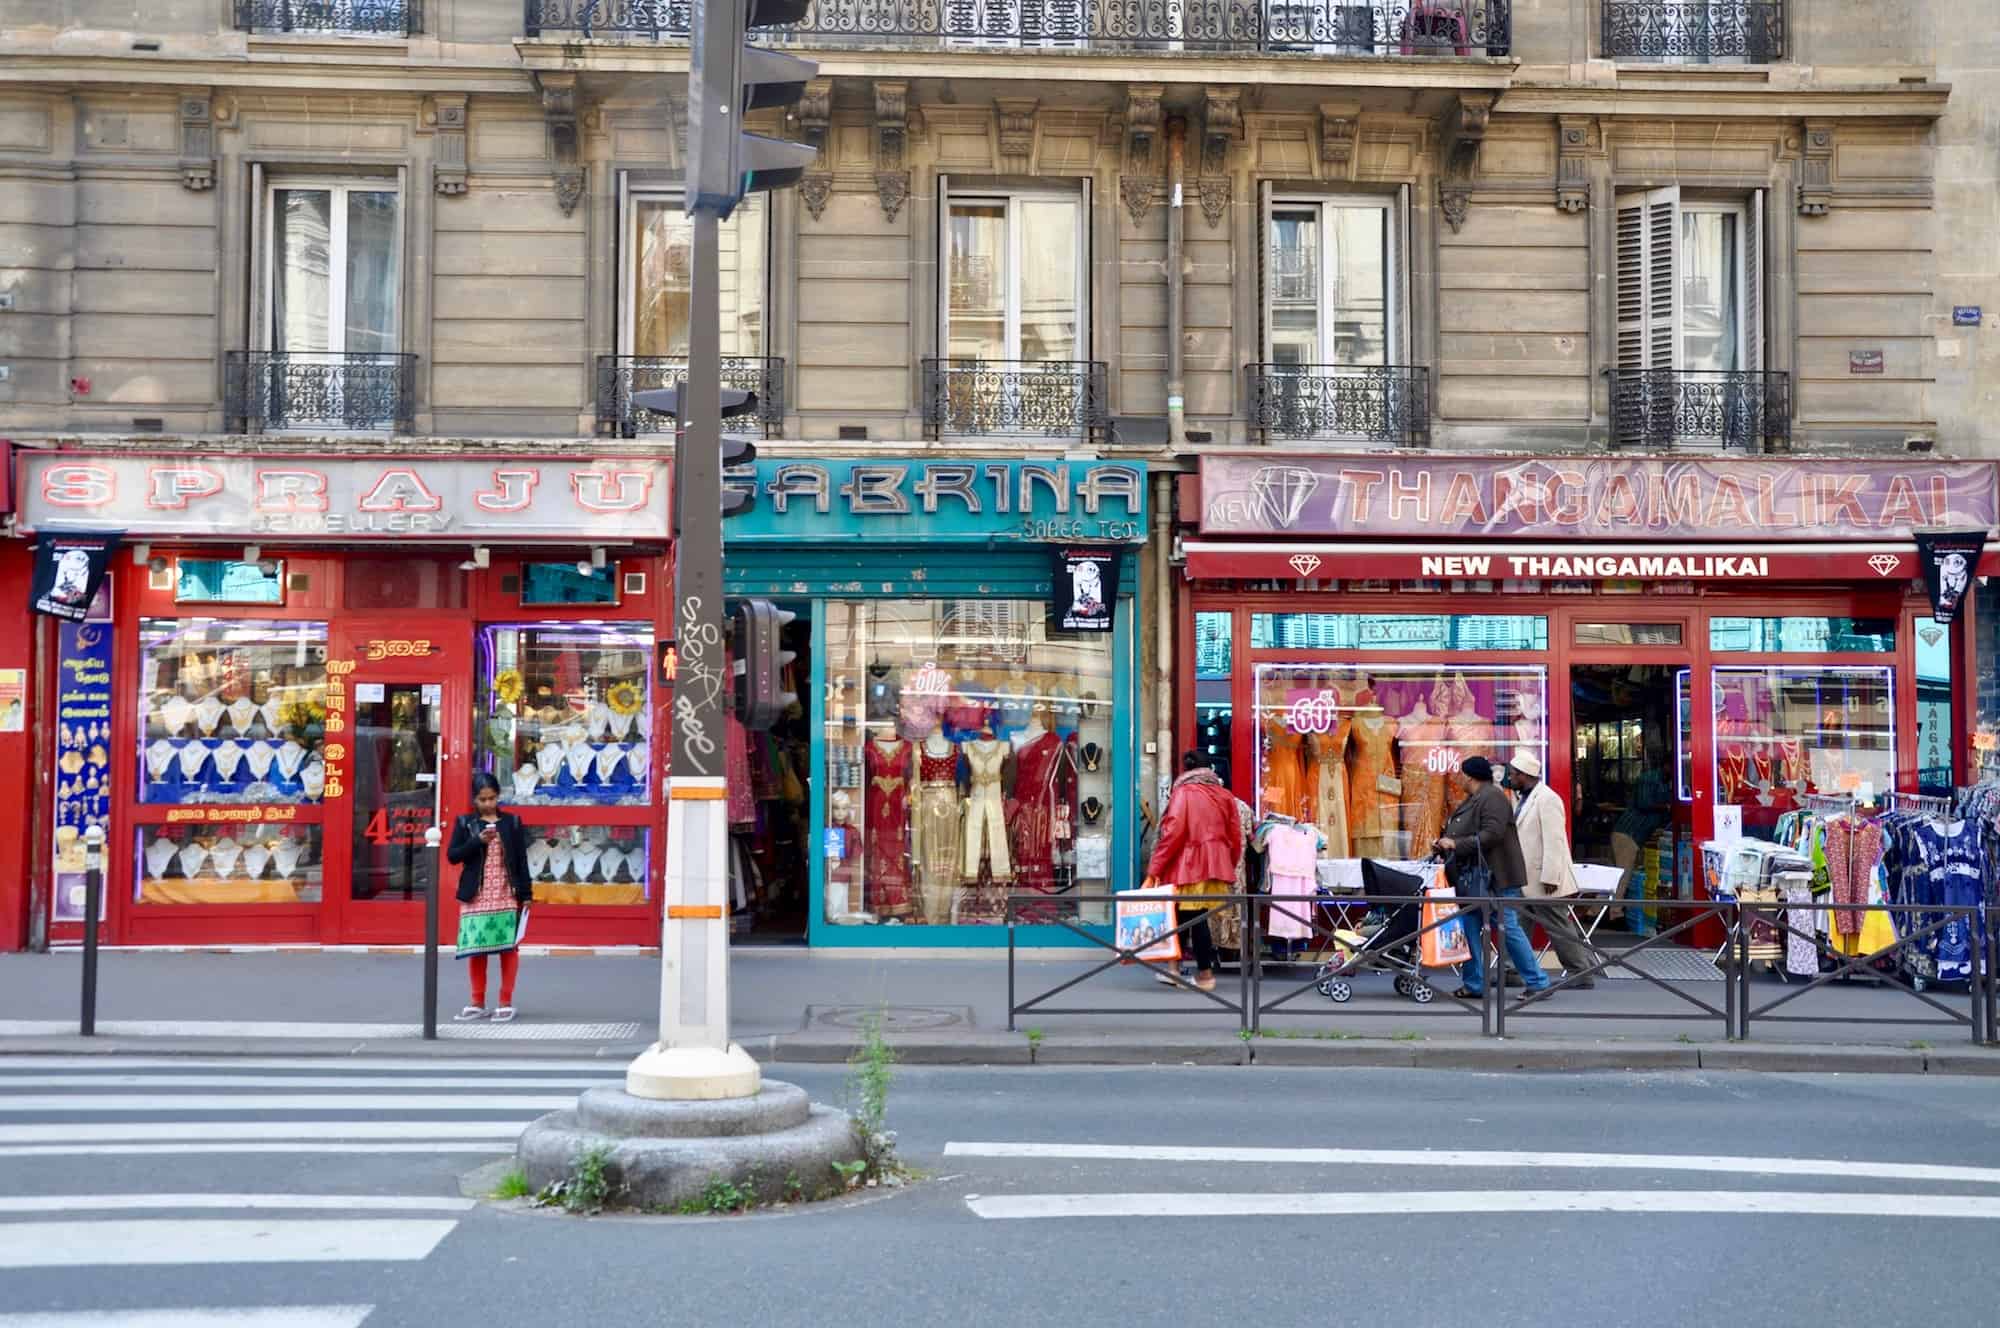 Paris' Little India multicultural neighborhood with its saree shops, restaurants, supermarkets and jewelers.